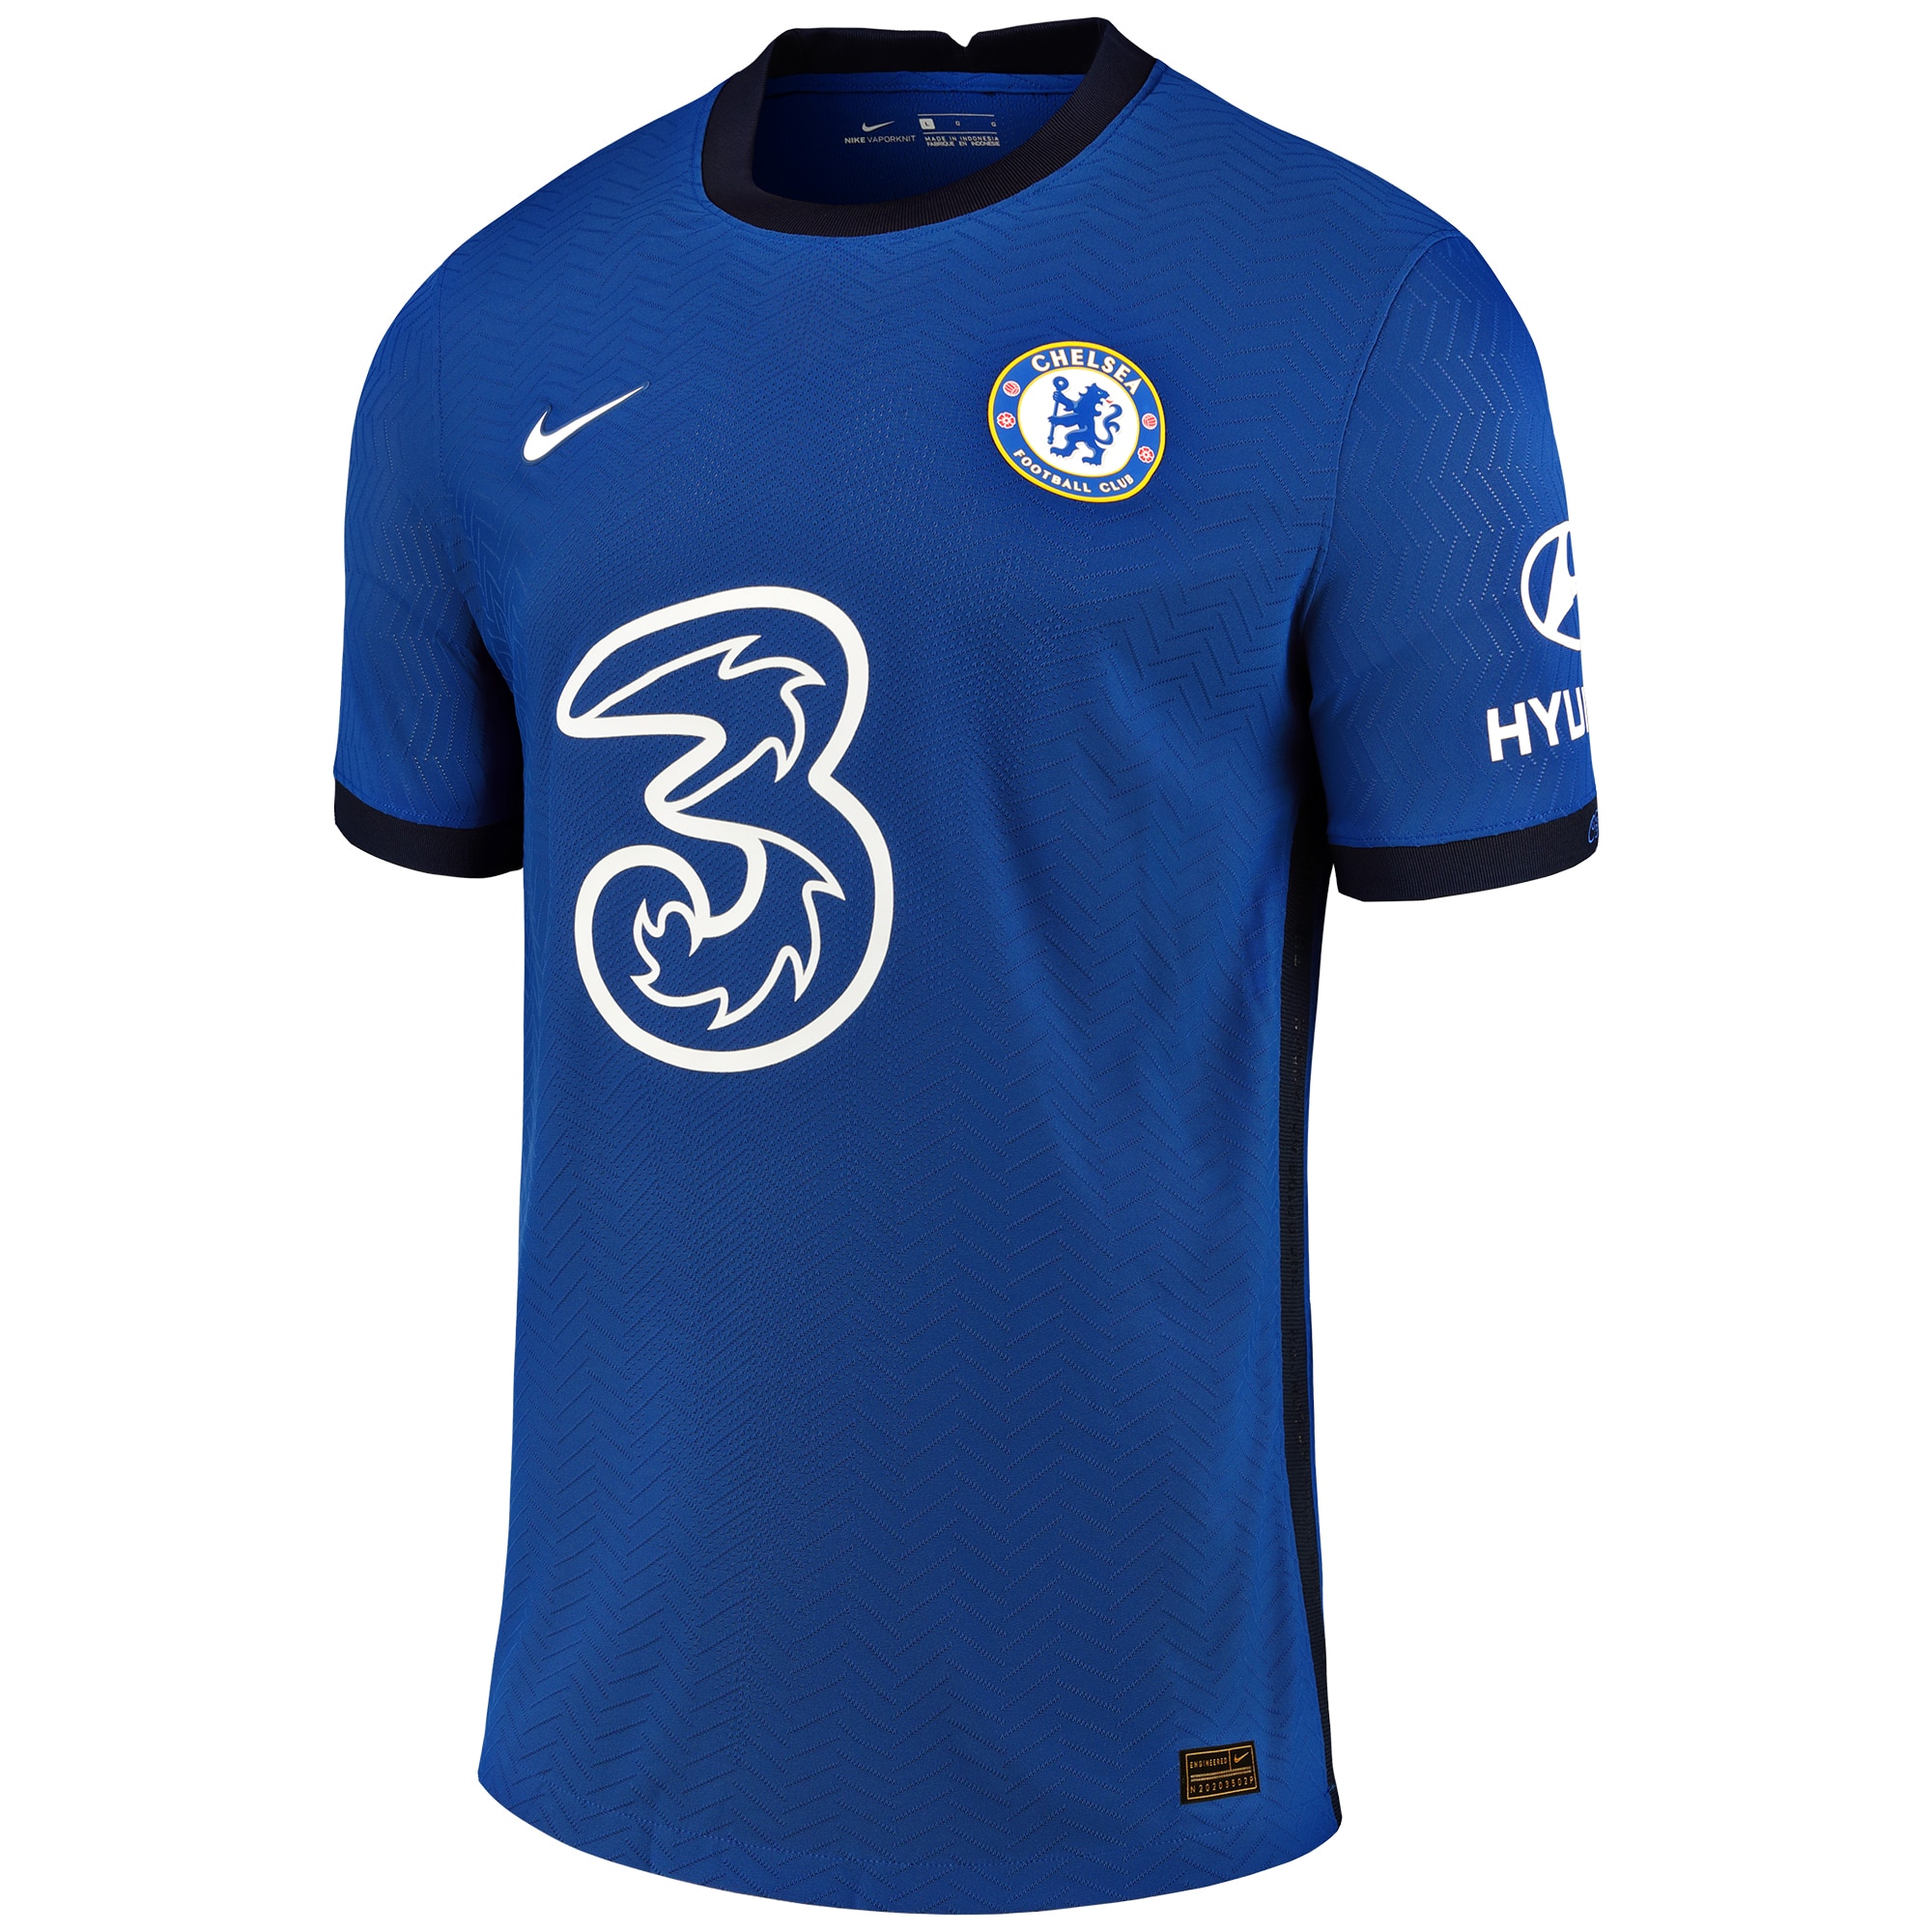 Pre-owned Nike  Chelsea Home Vapor Match Shirt 2020-21 Jersey Blue